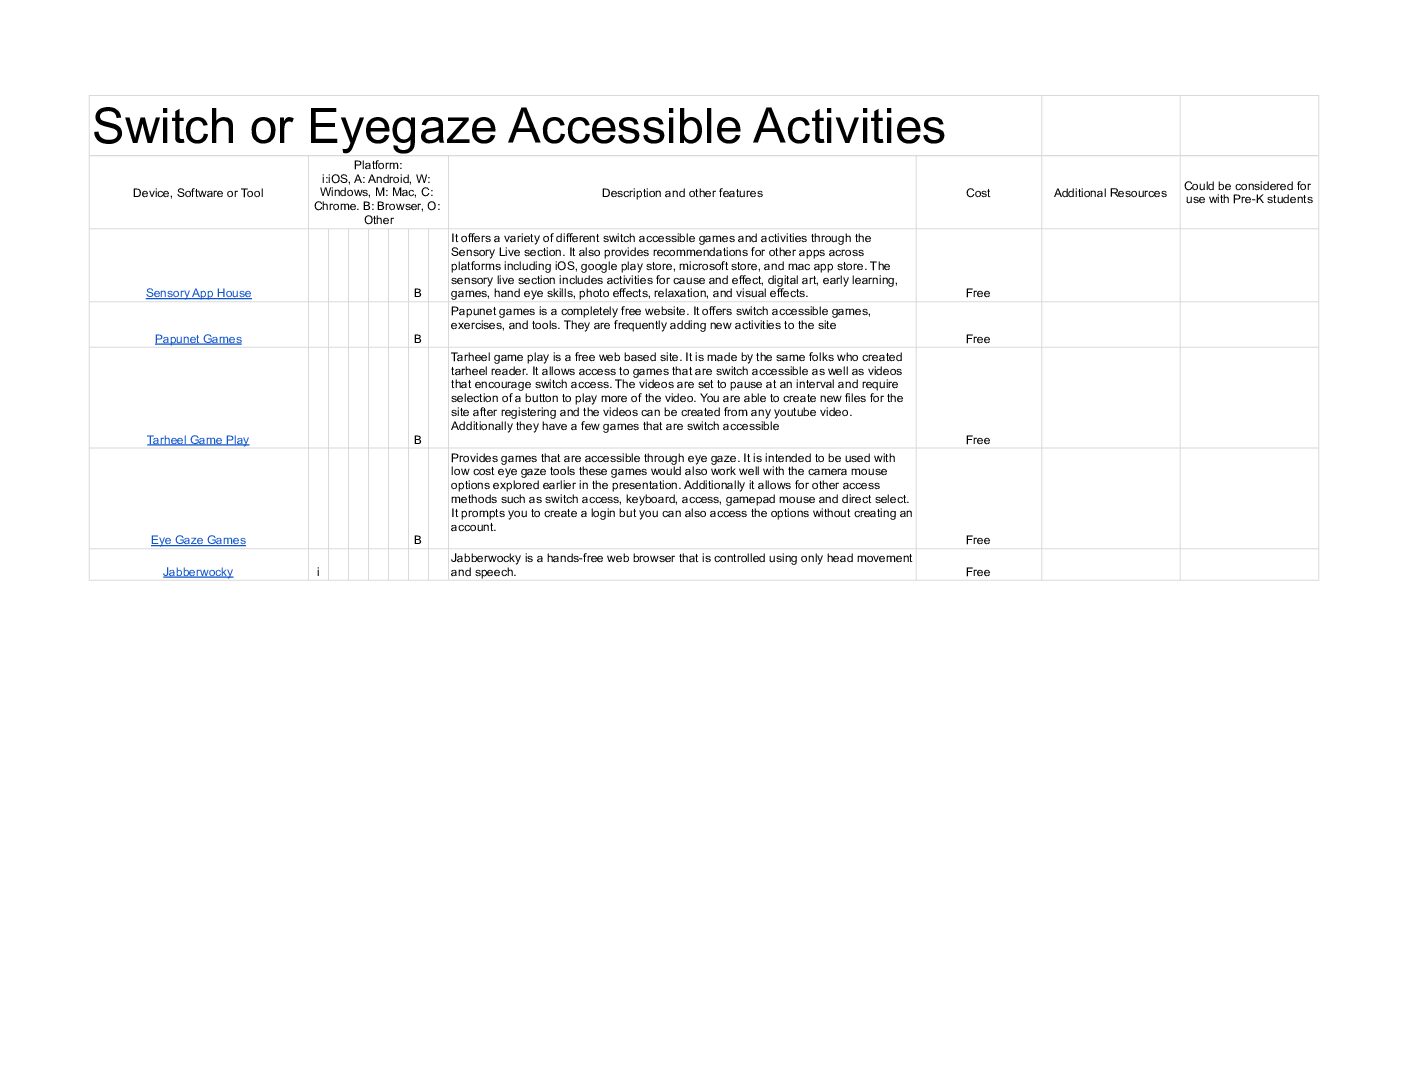 Assistive Technology Tools for Consideration - Switch or Eyegaze Accessible Activities